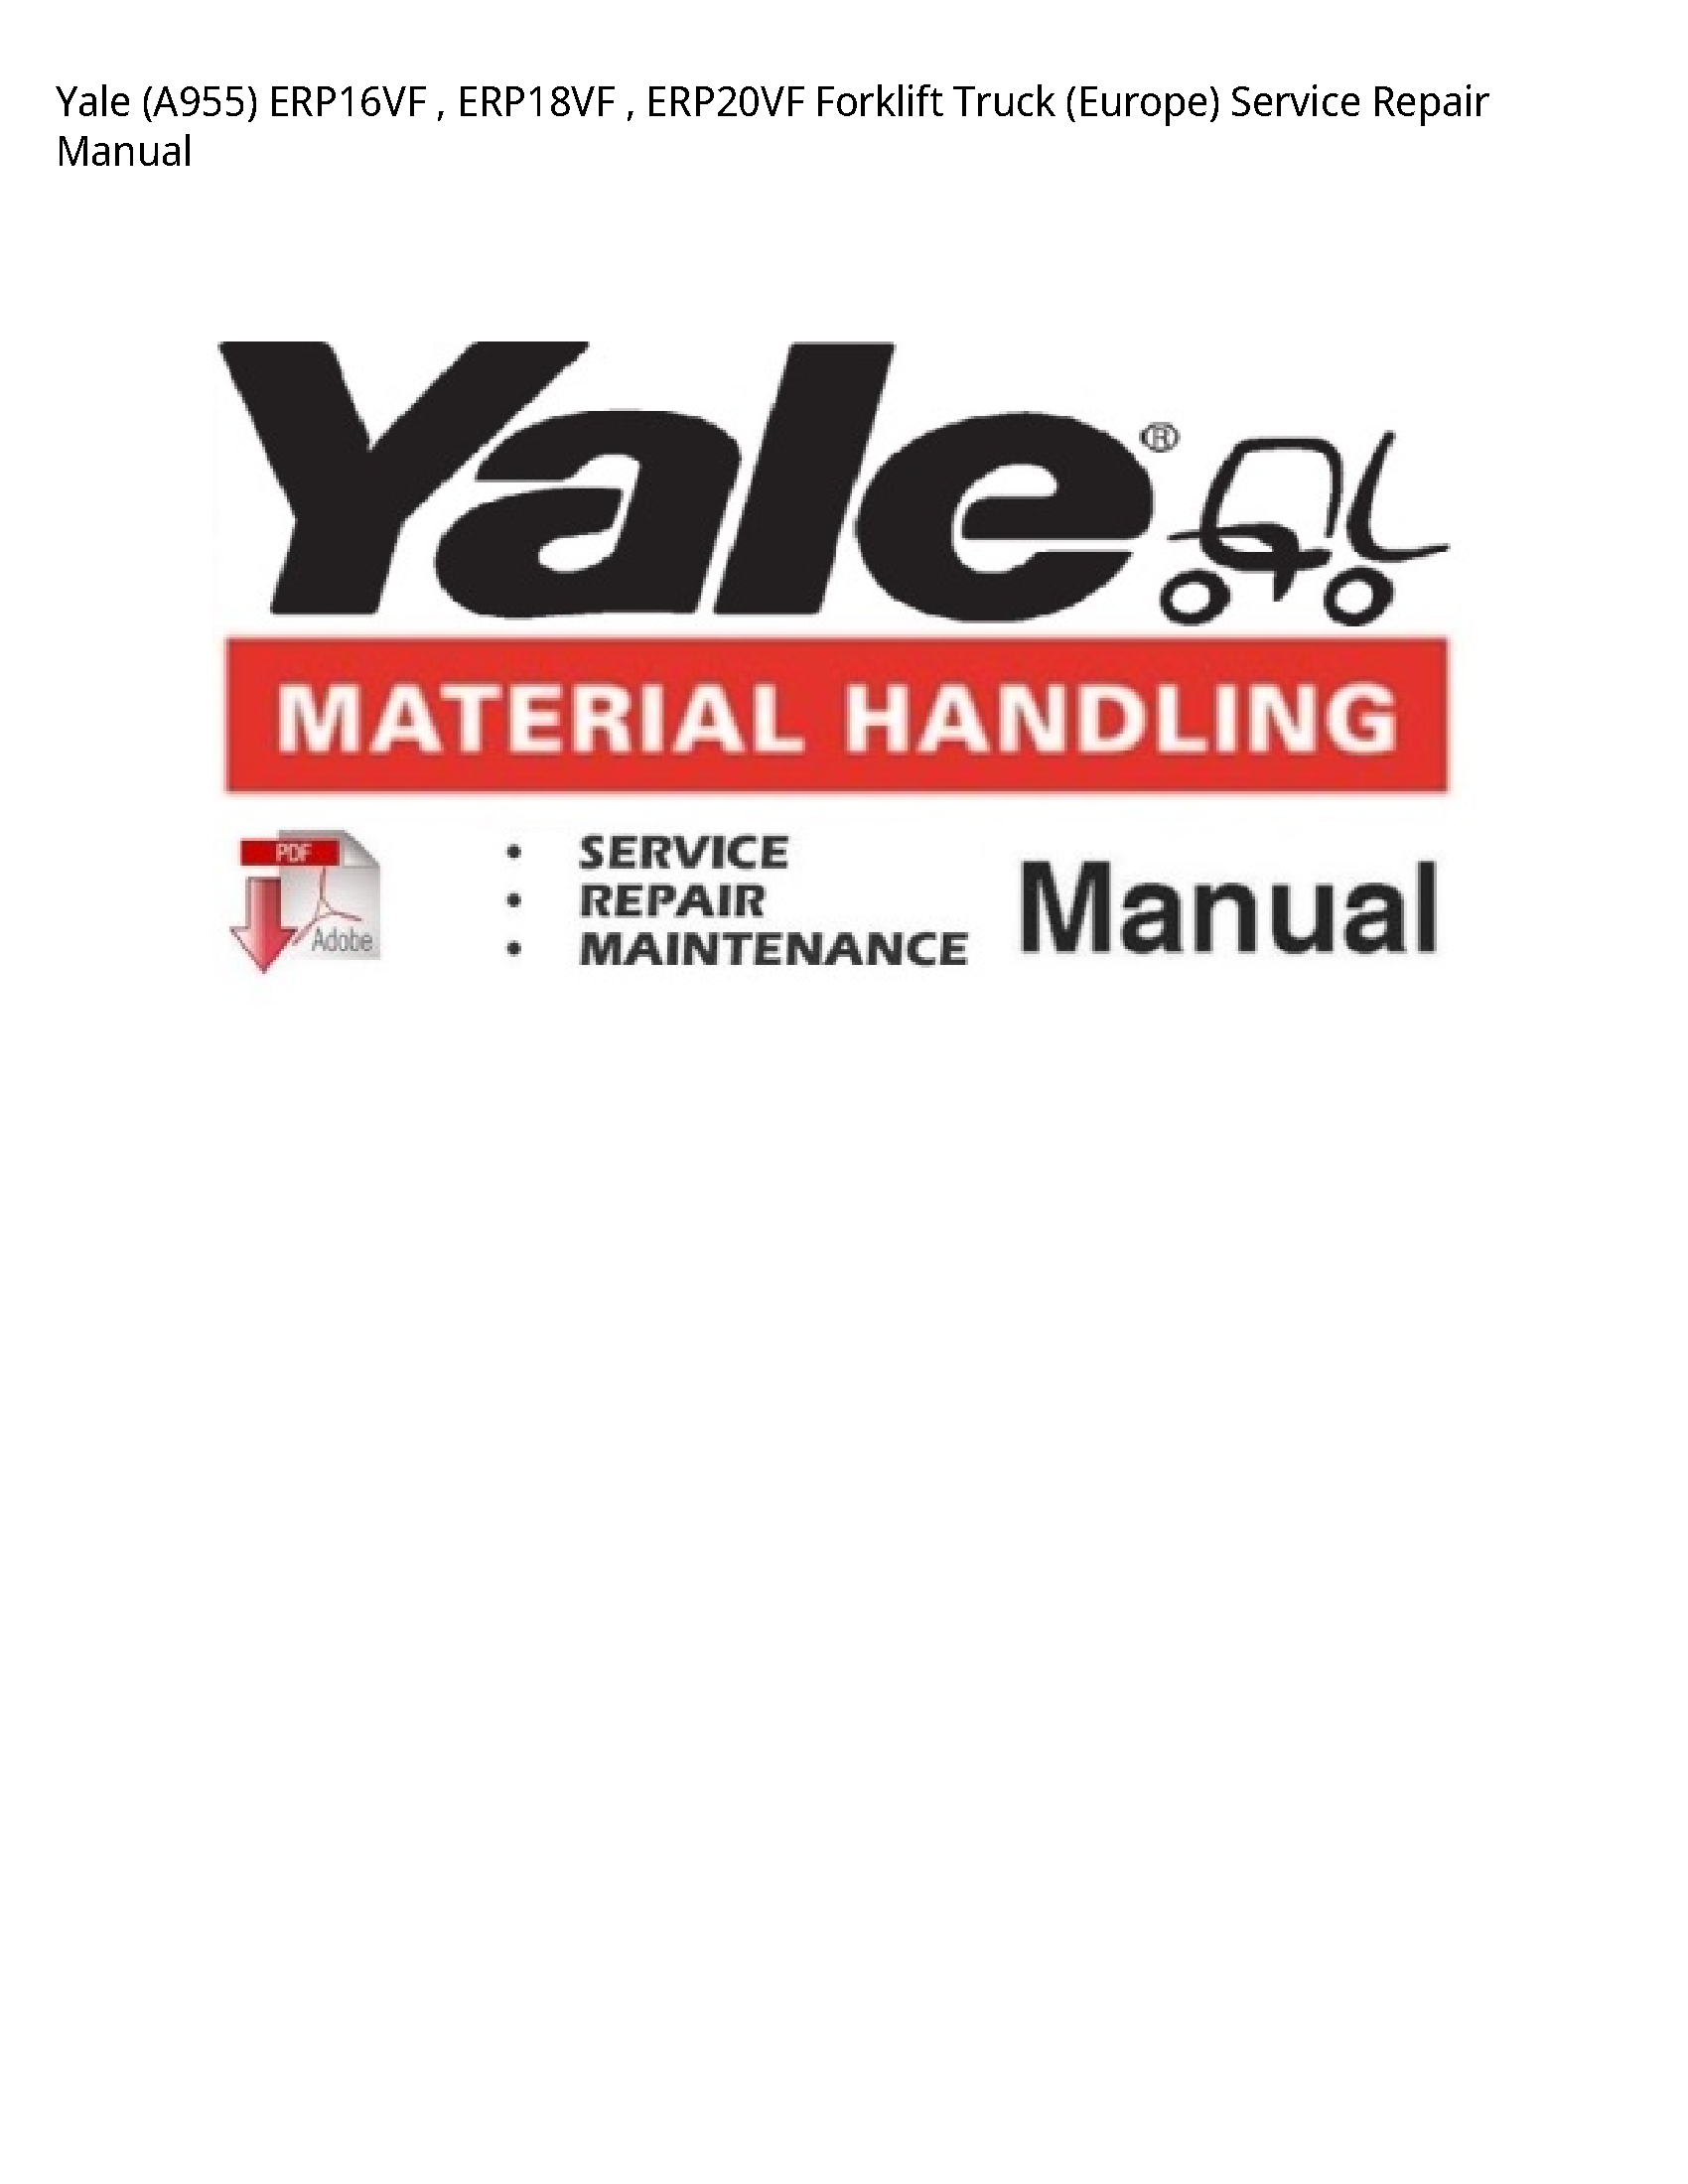 Yale (A955) Forklift Truck (Europe) manual